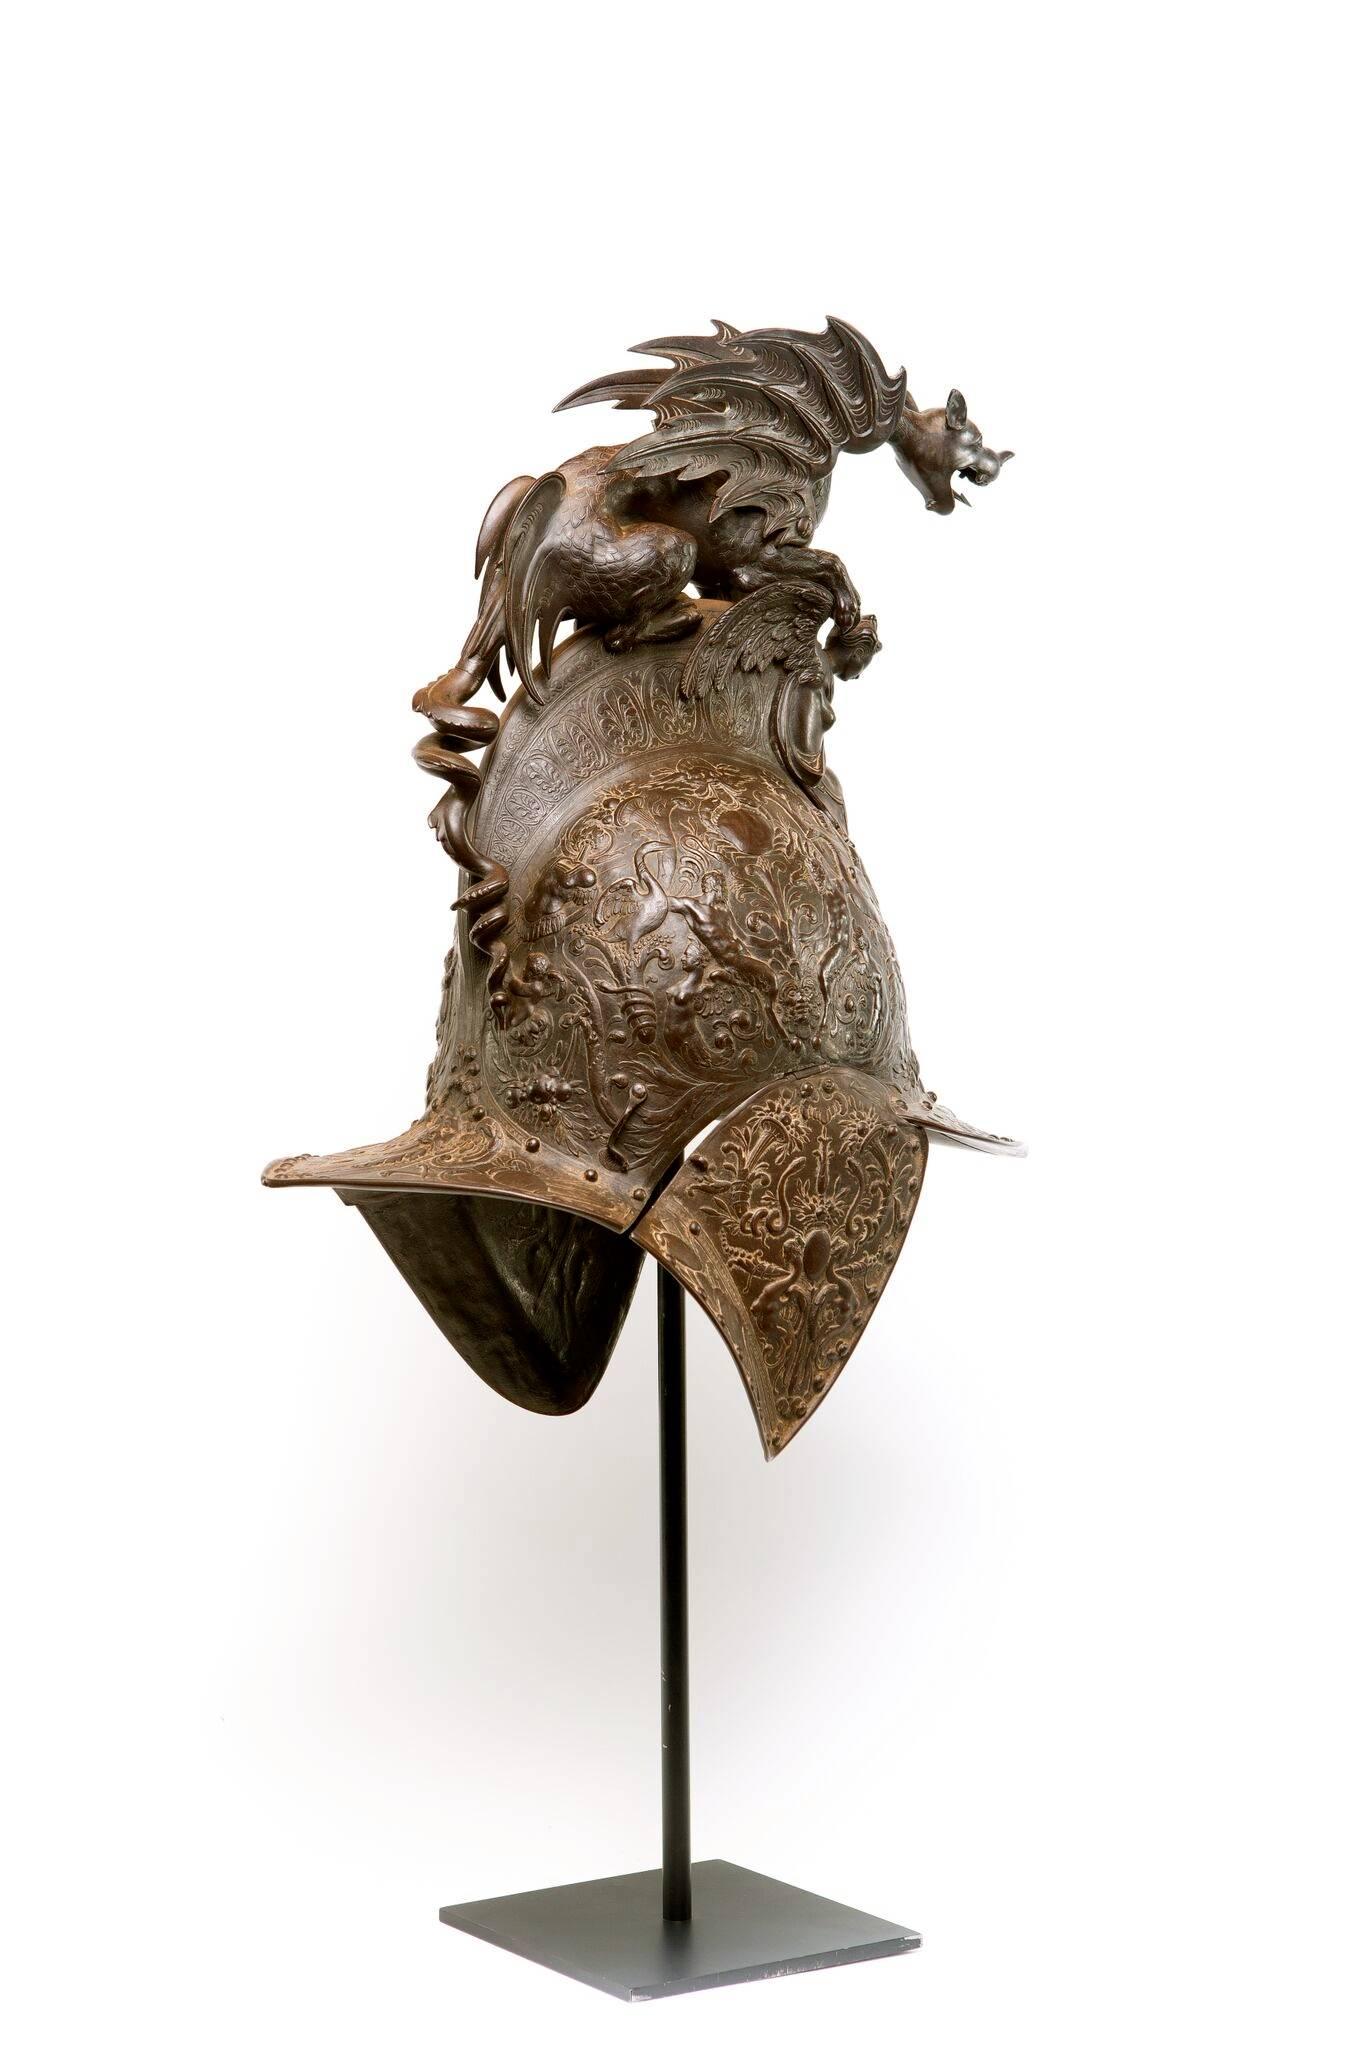 A Renaissance style relief decorated bronze metal parade helmet with pointed visor, hinged cheek flaps and flared neck cover, decorated with classical satyrs, winged terms and cranes. Surmounted by griffin crest above caryatid, on a metal pole